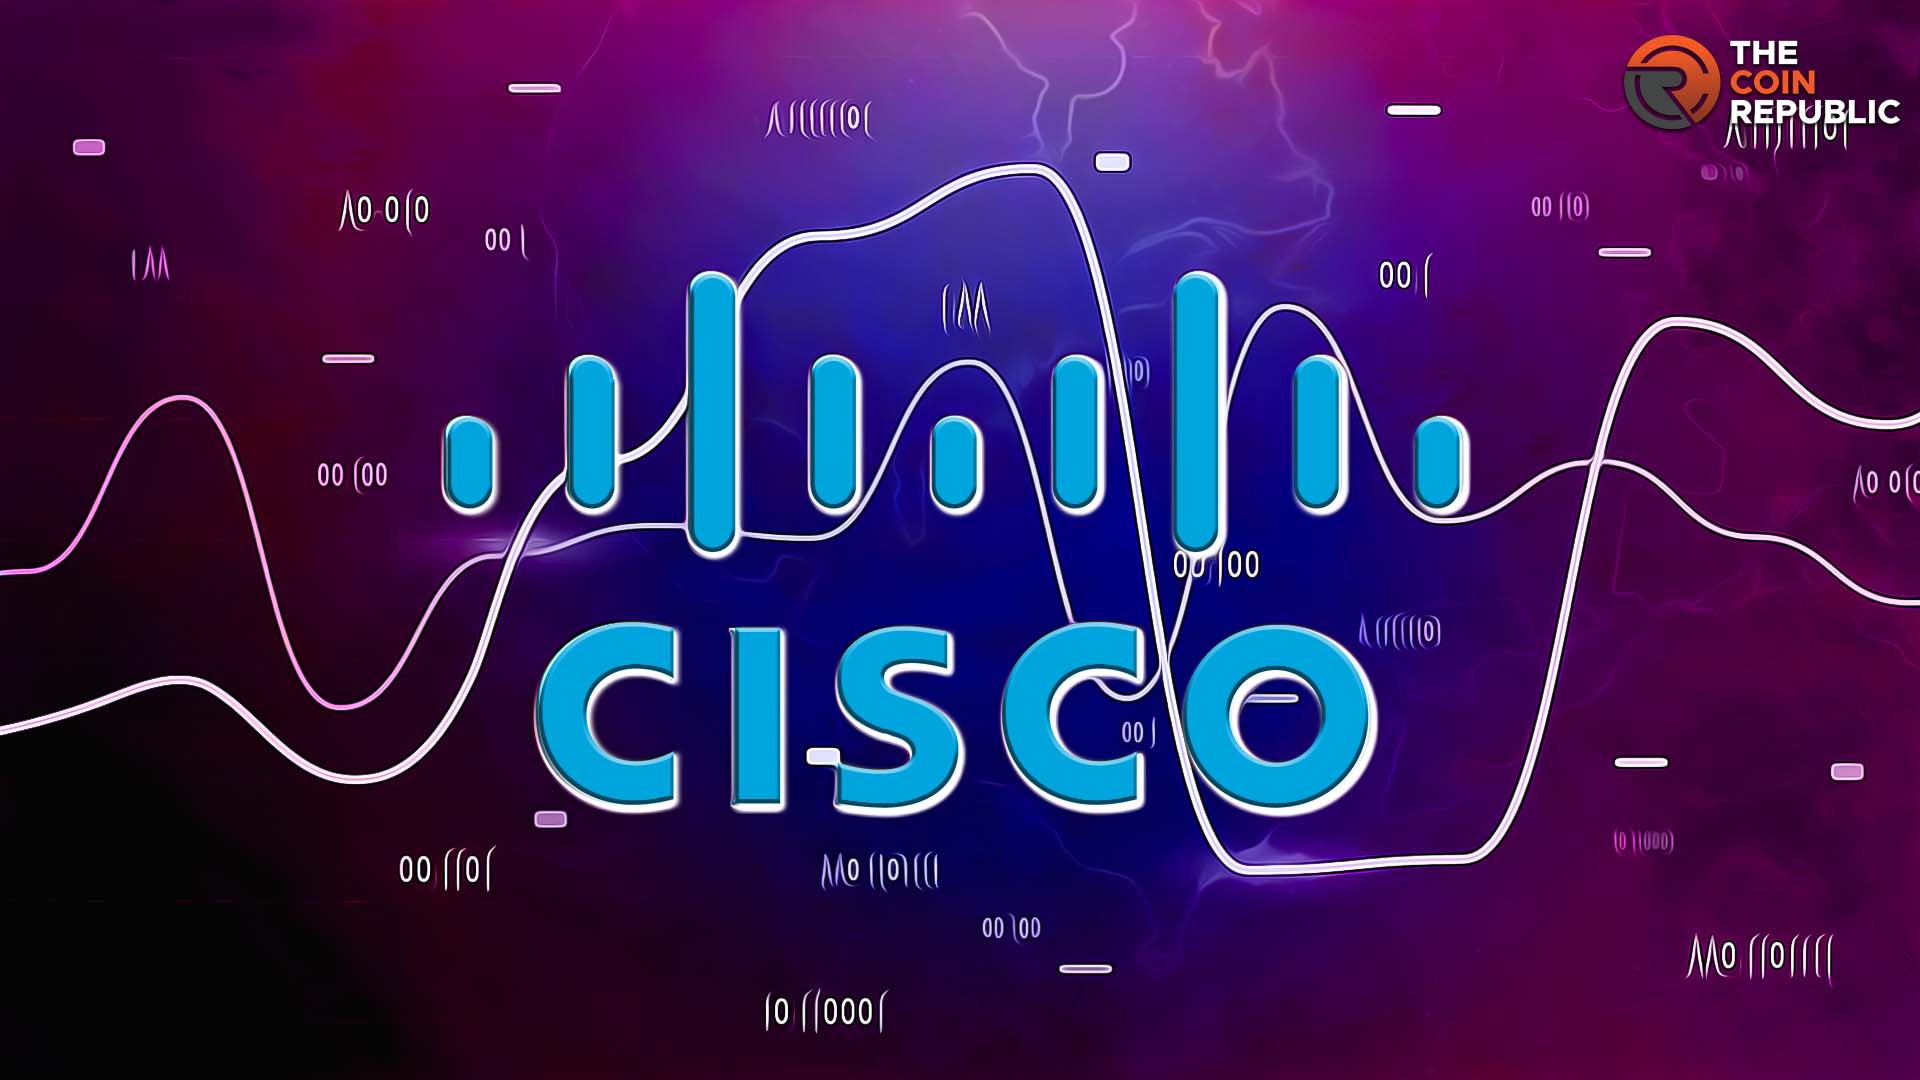 Cisco Systems (CSCO Stock): Price Declines To The $50 Level 